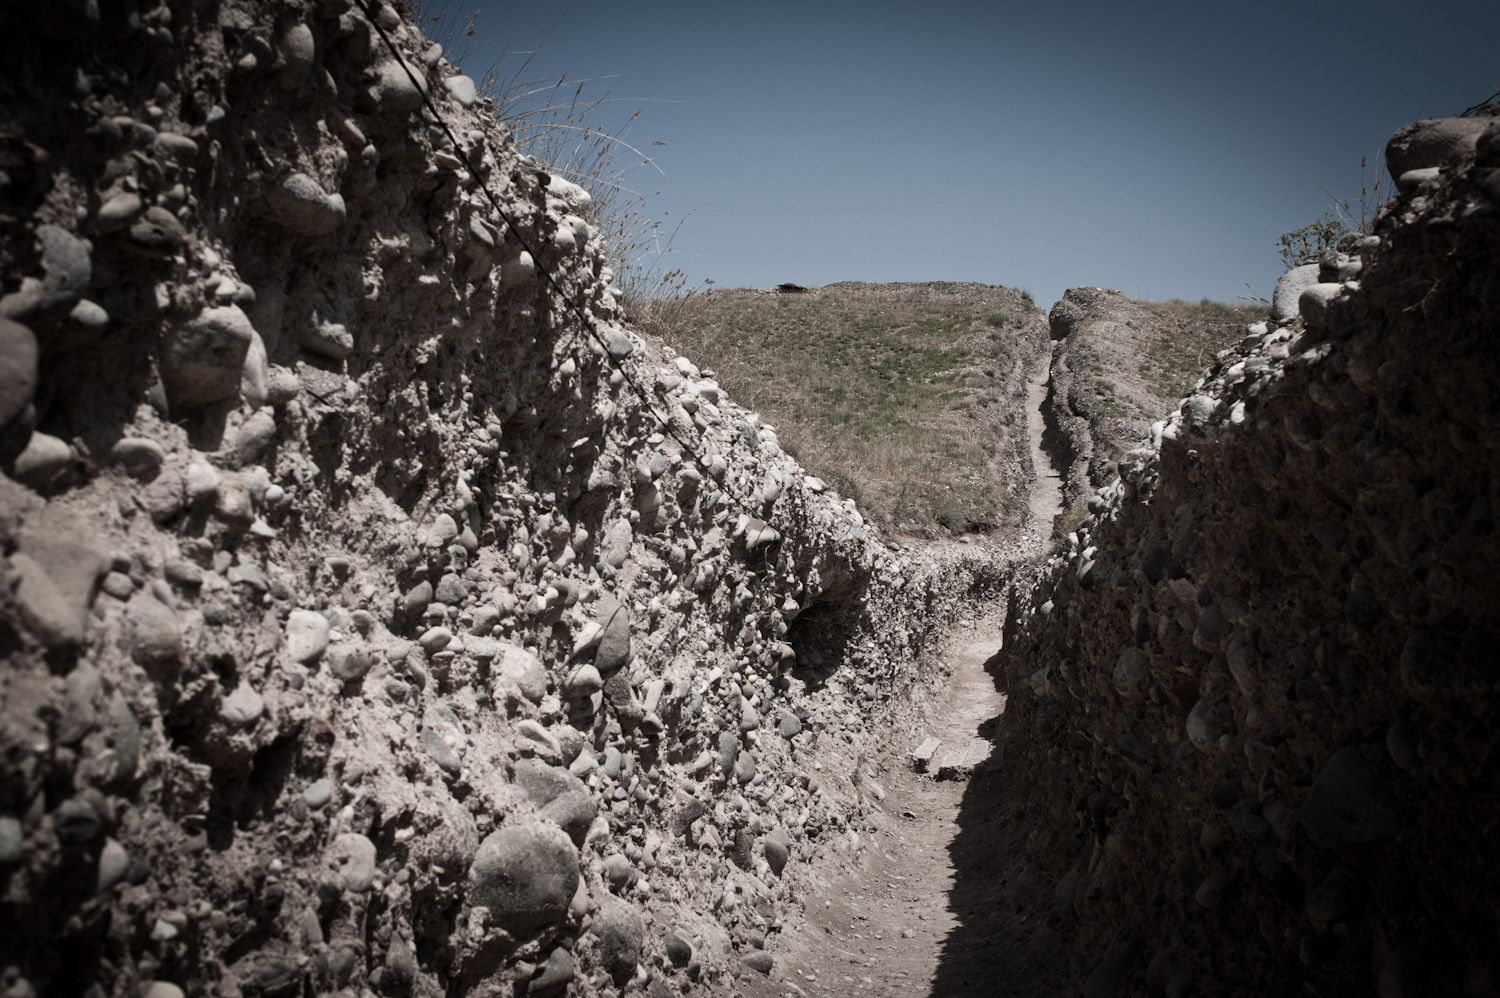  Trenches at the Mataghis frontline. During the Karabakh war (1988-94) this area was nicknamed "whore's fishnet stockings" referencing the multitude of holes caused by heavy shelling.   